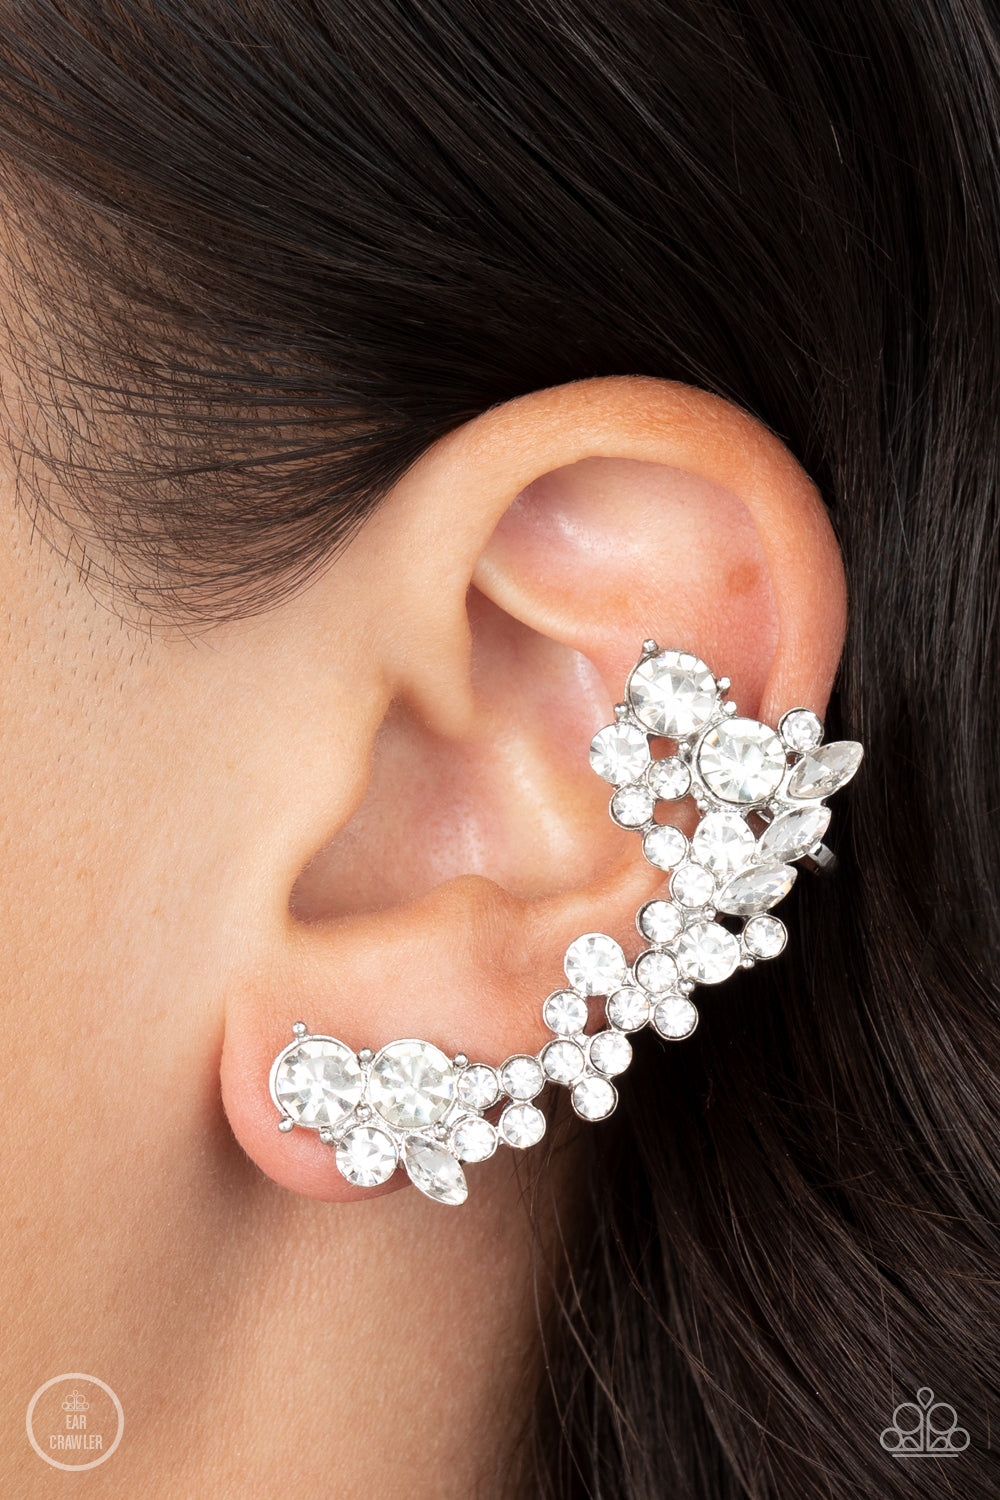 Paparazzi Earrings Astronomical Allure - White